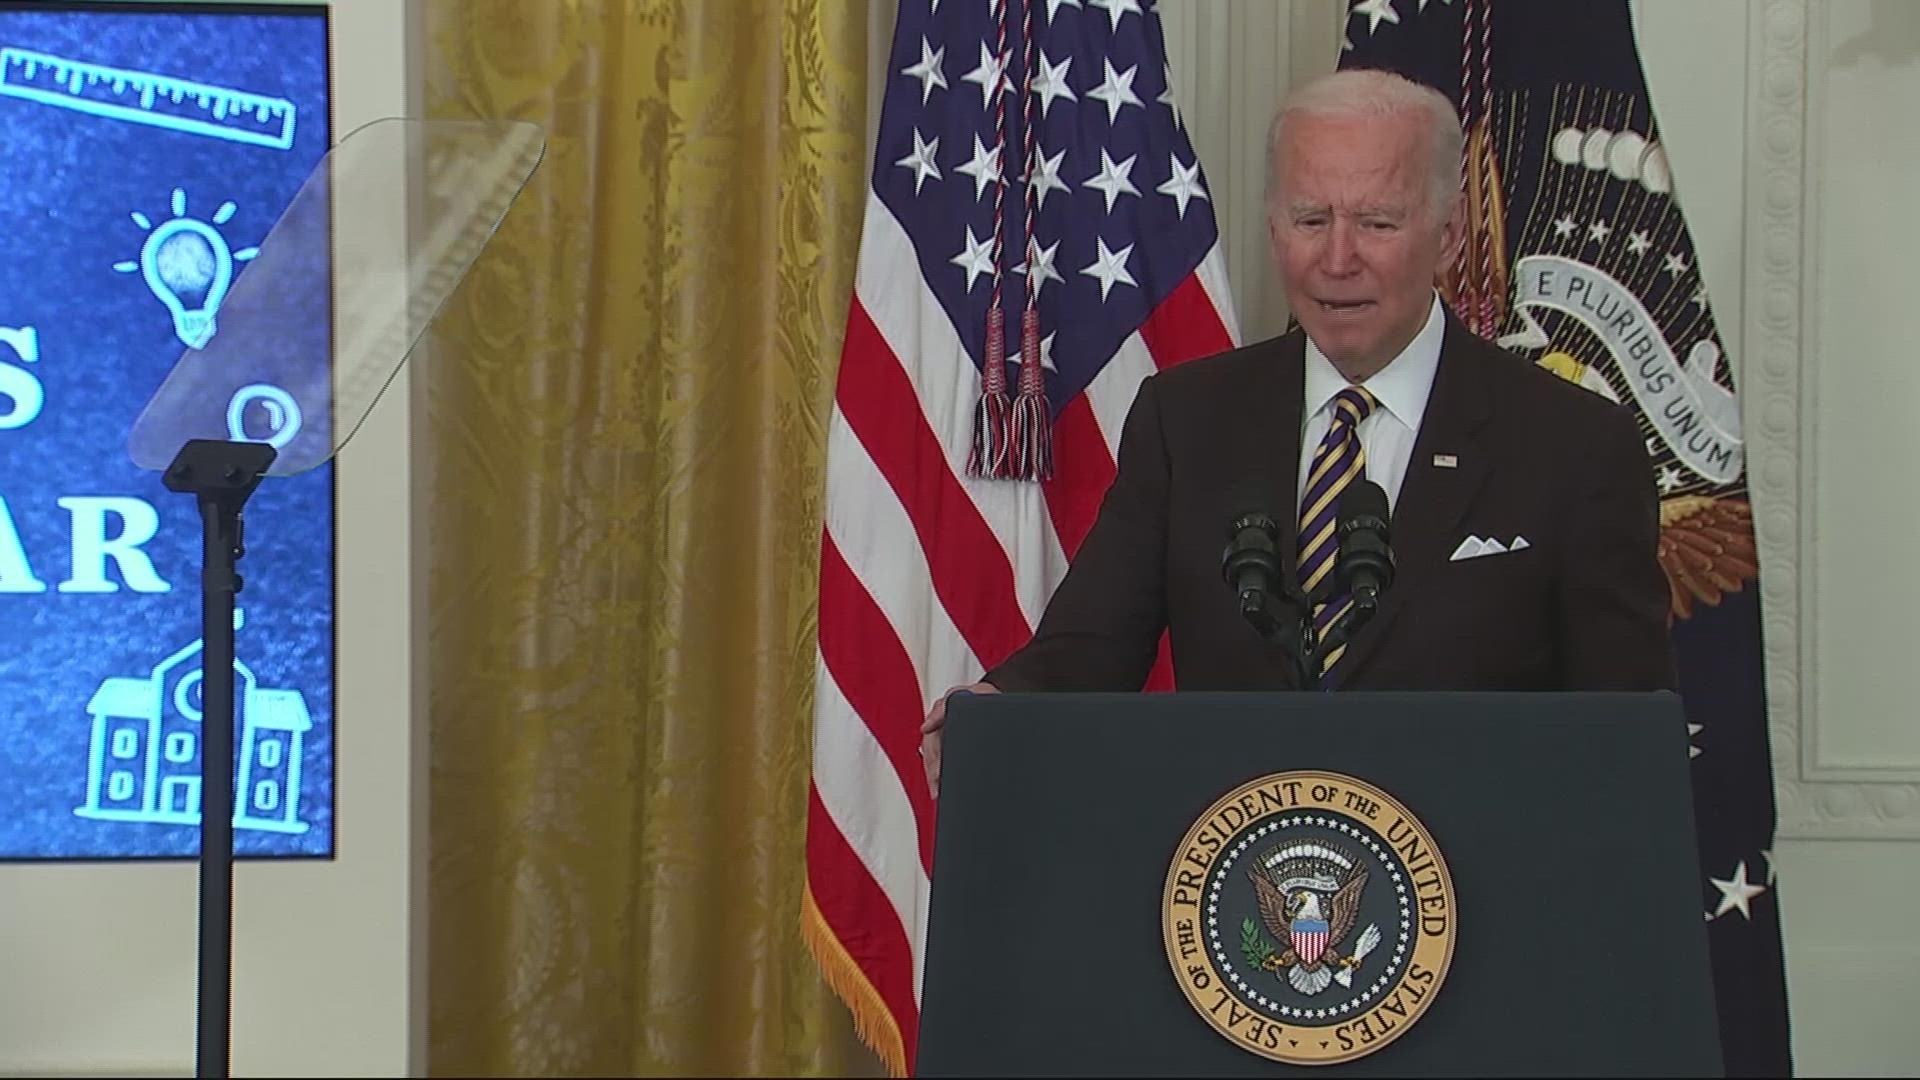 President Joe Biden offered a deeply personal story saluting school leaders who helped him overcome a serious childhood stutter.